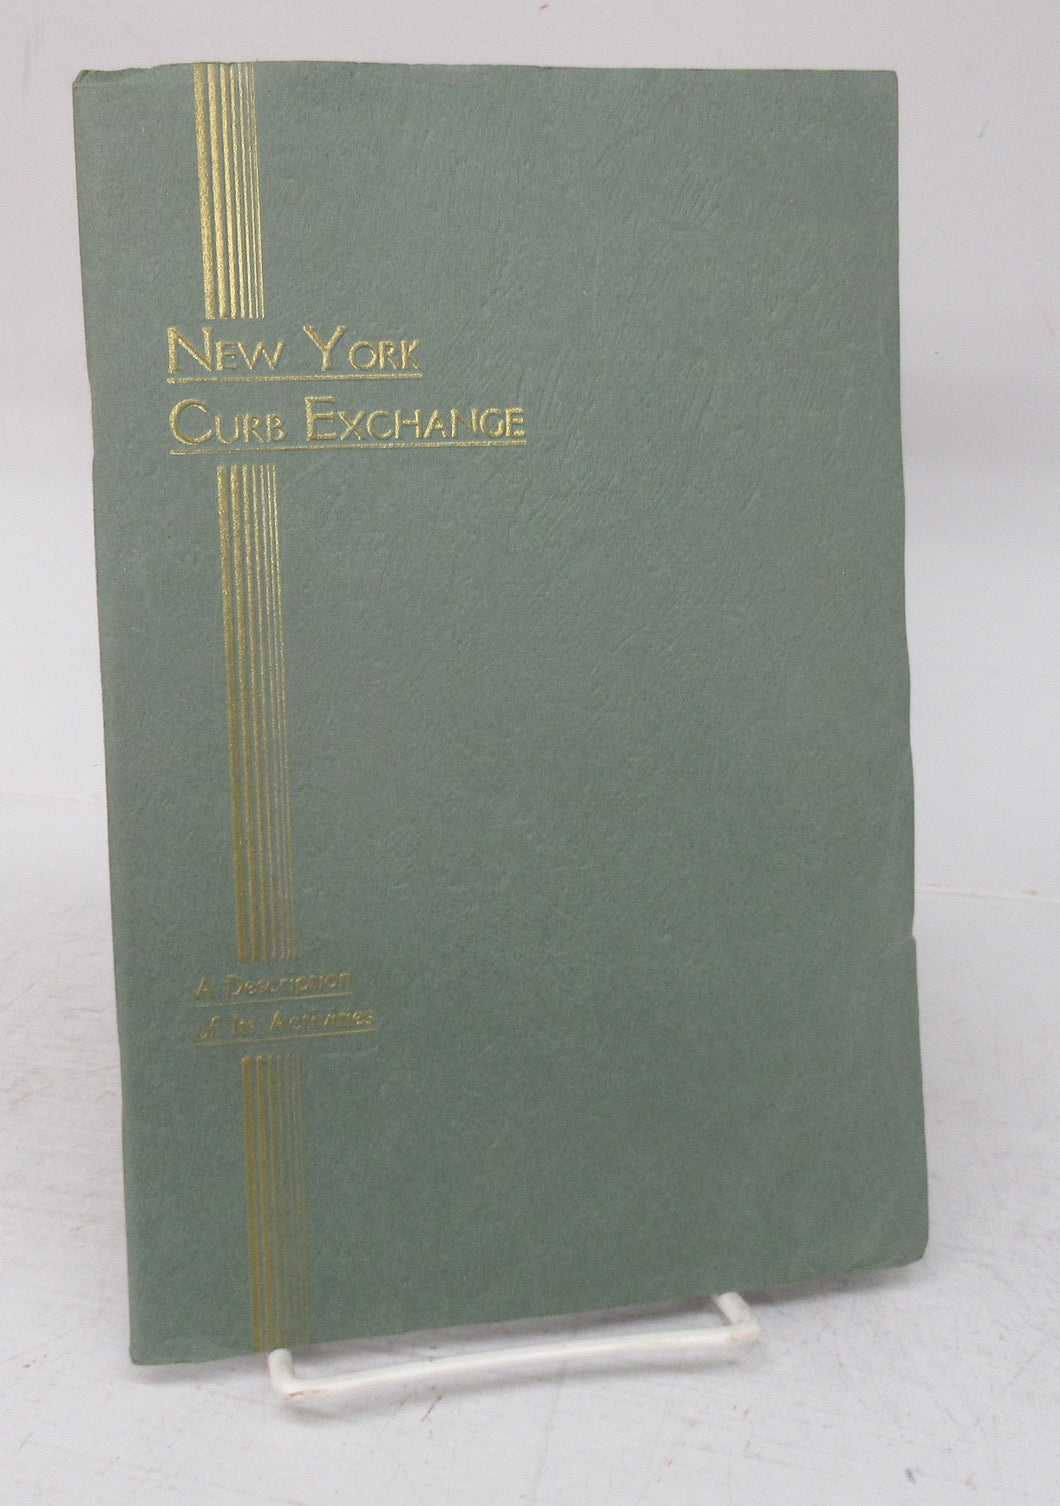 New York Curb Exchange: A Description of Its Activities